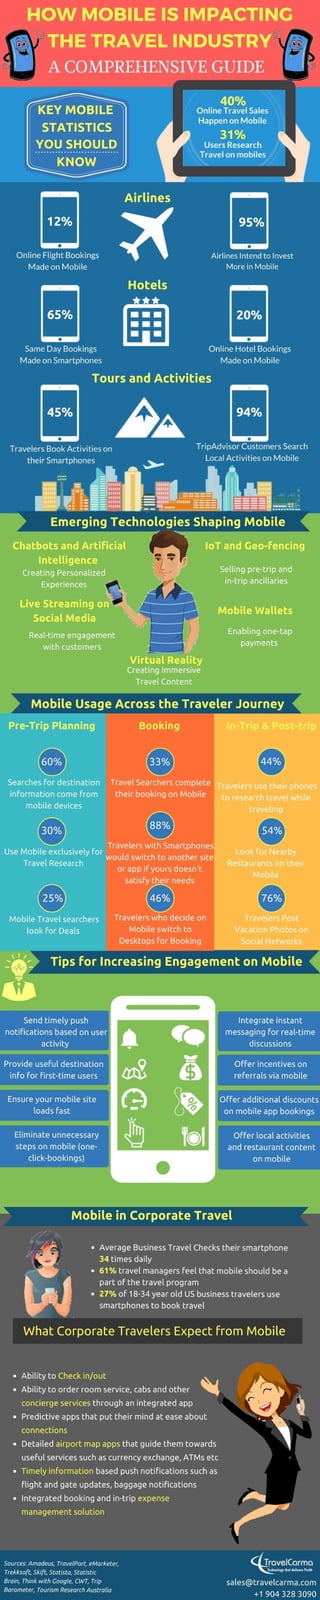 How Mobile is Impacting the Travel Industry: A Comprehensive Guide